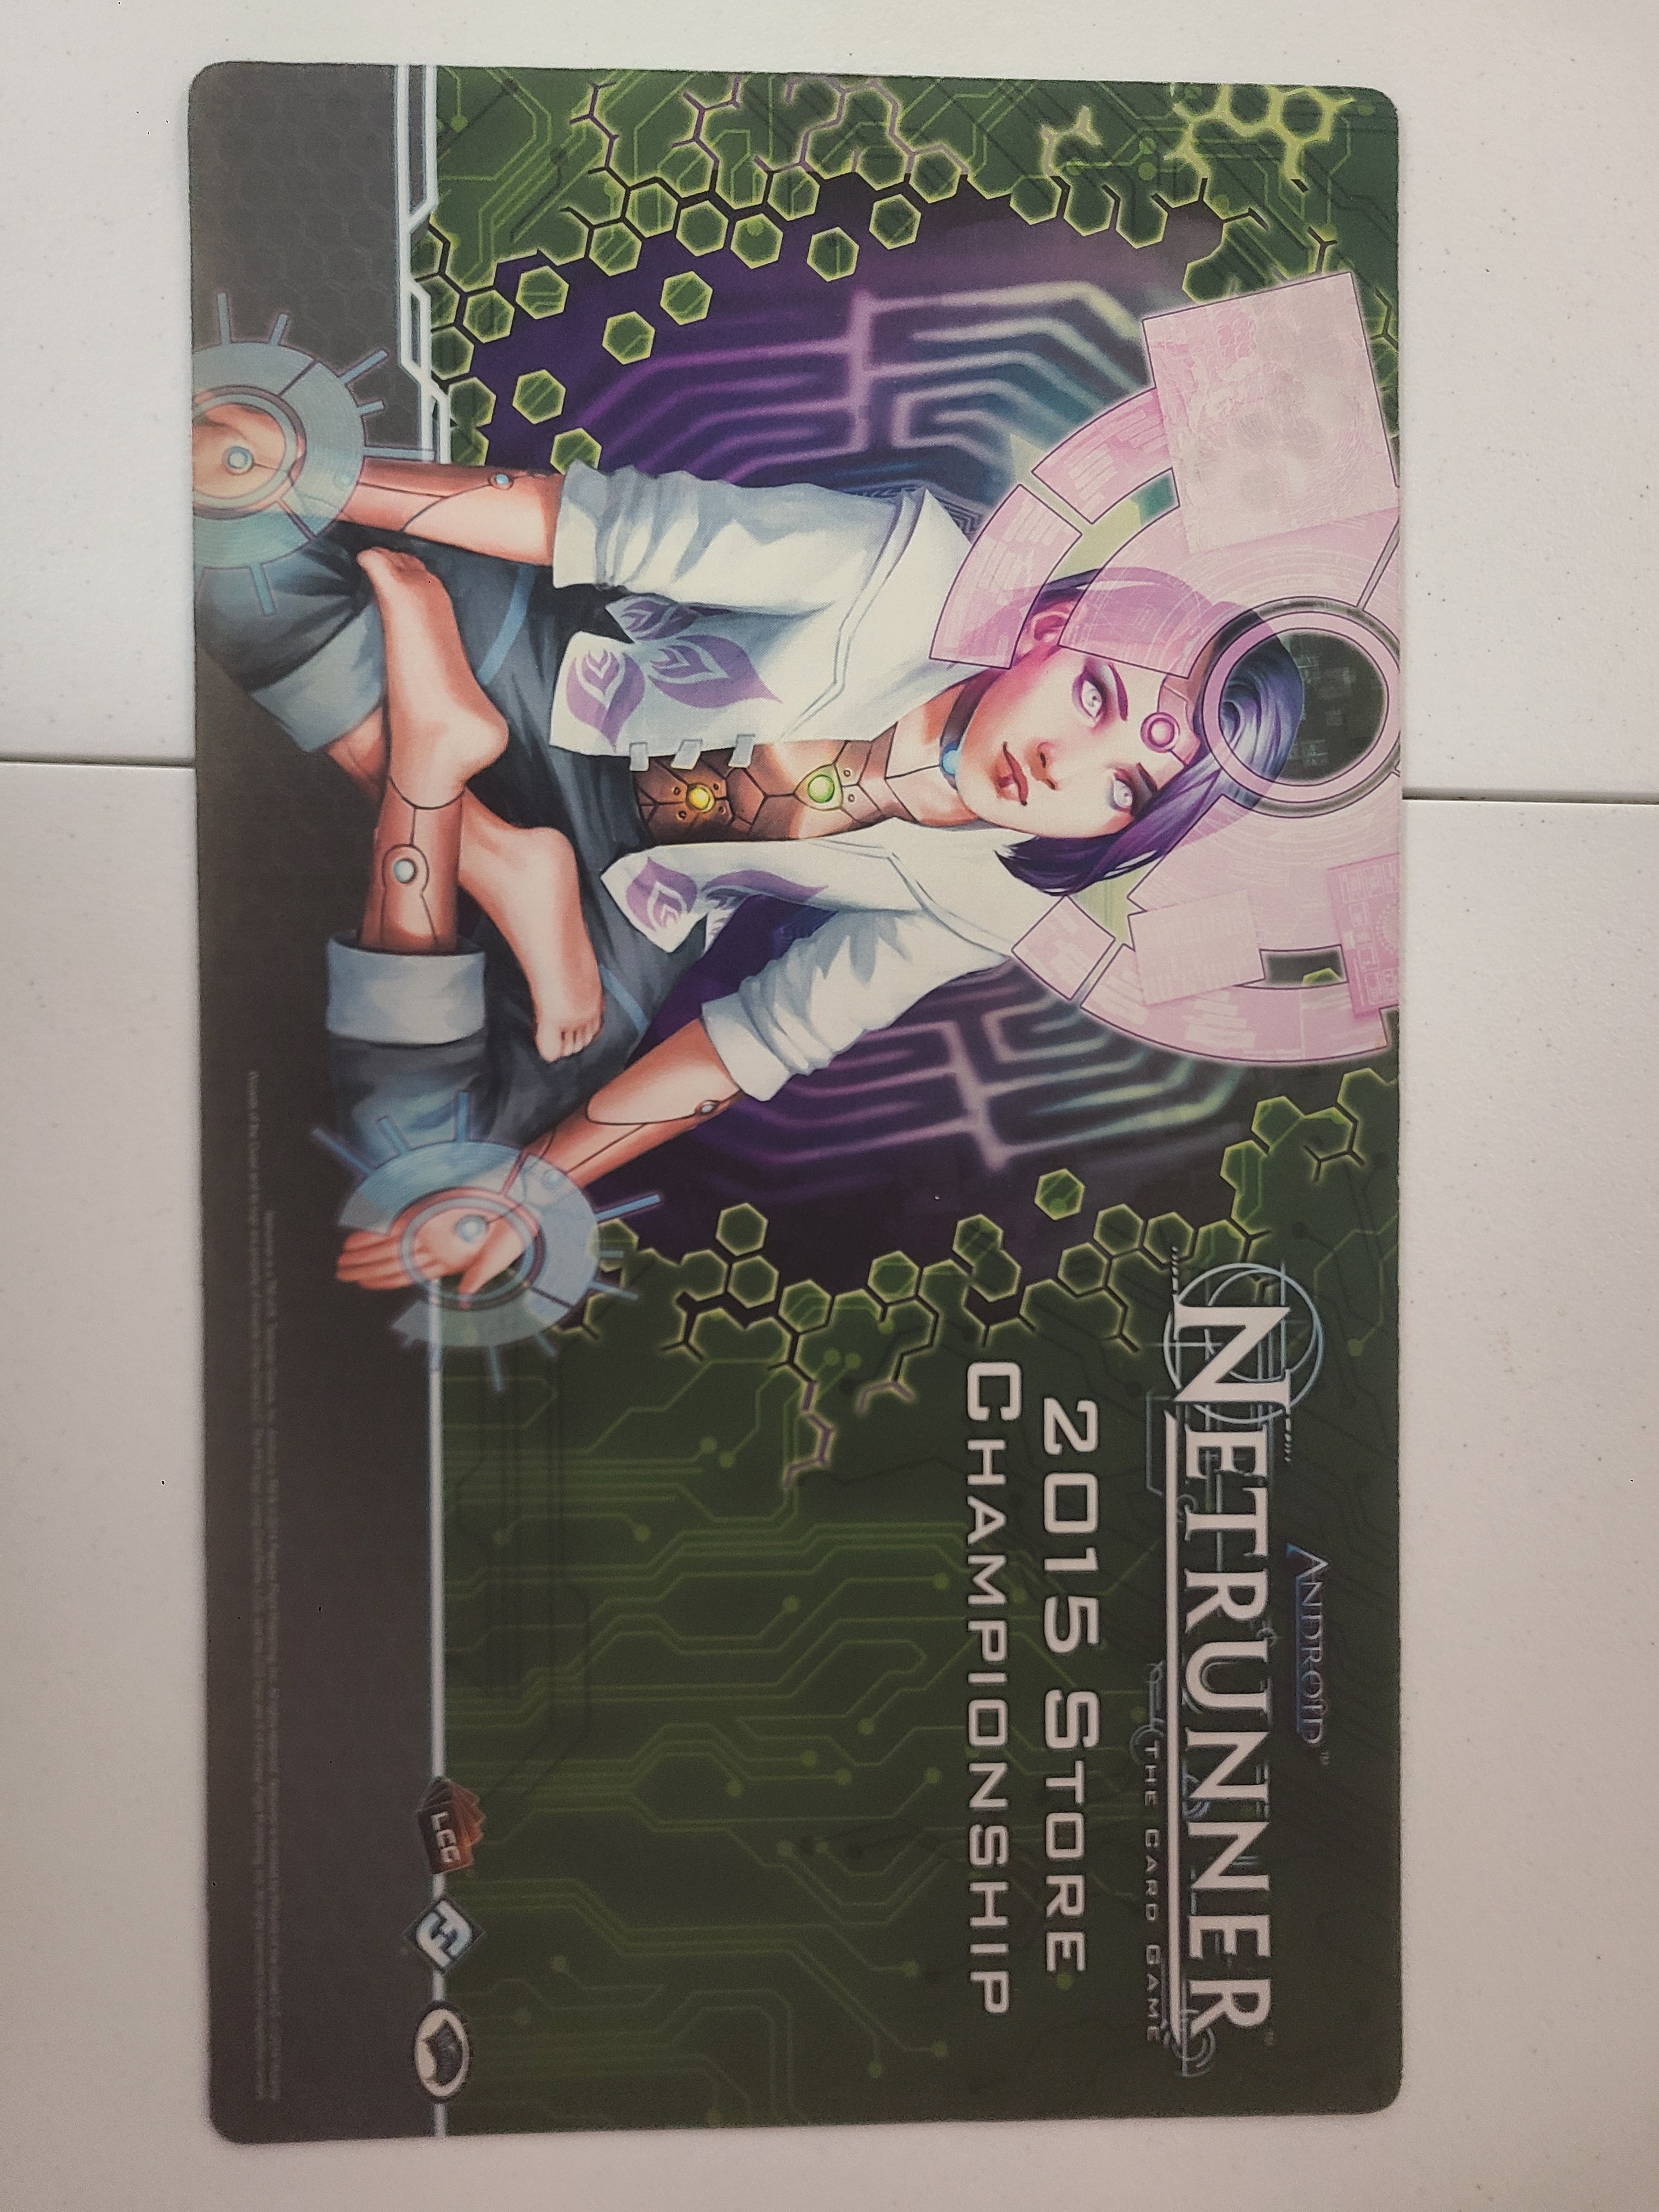 (Used) FFG Playmat - ANR 2015 Store Championship Rielle 